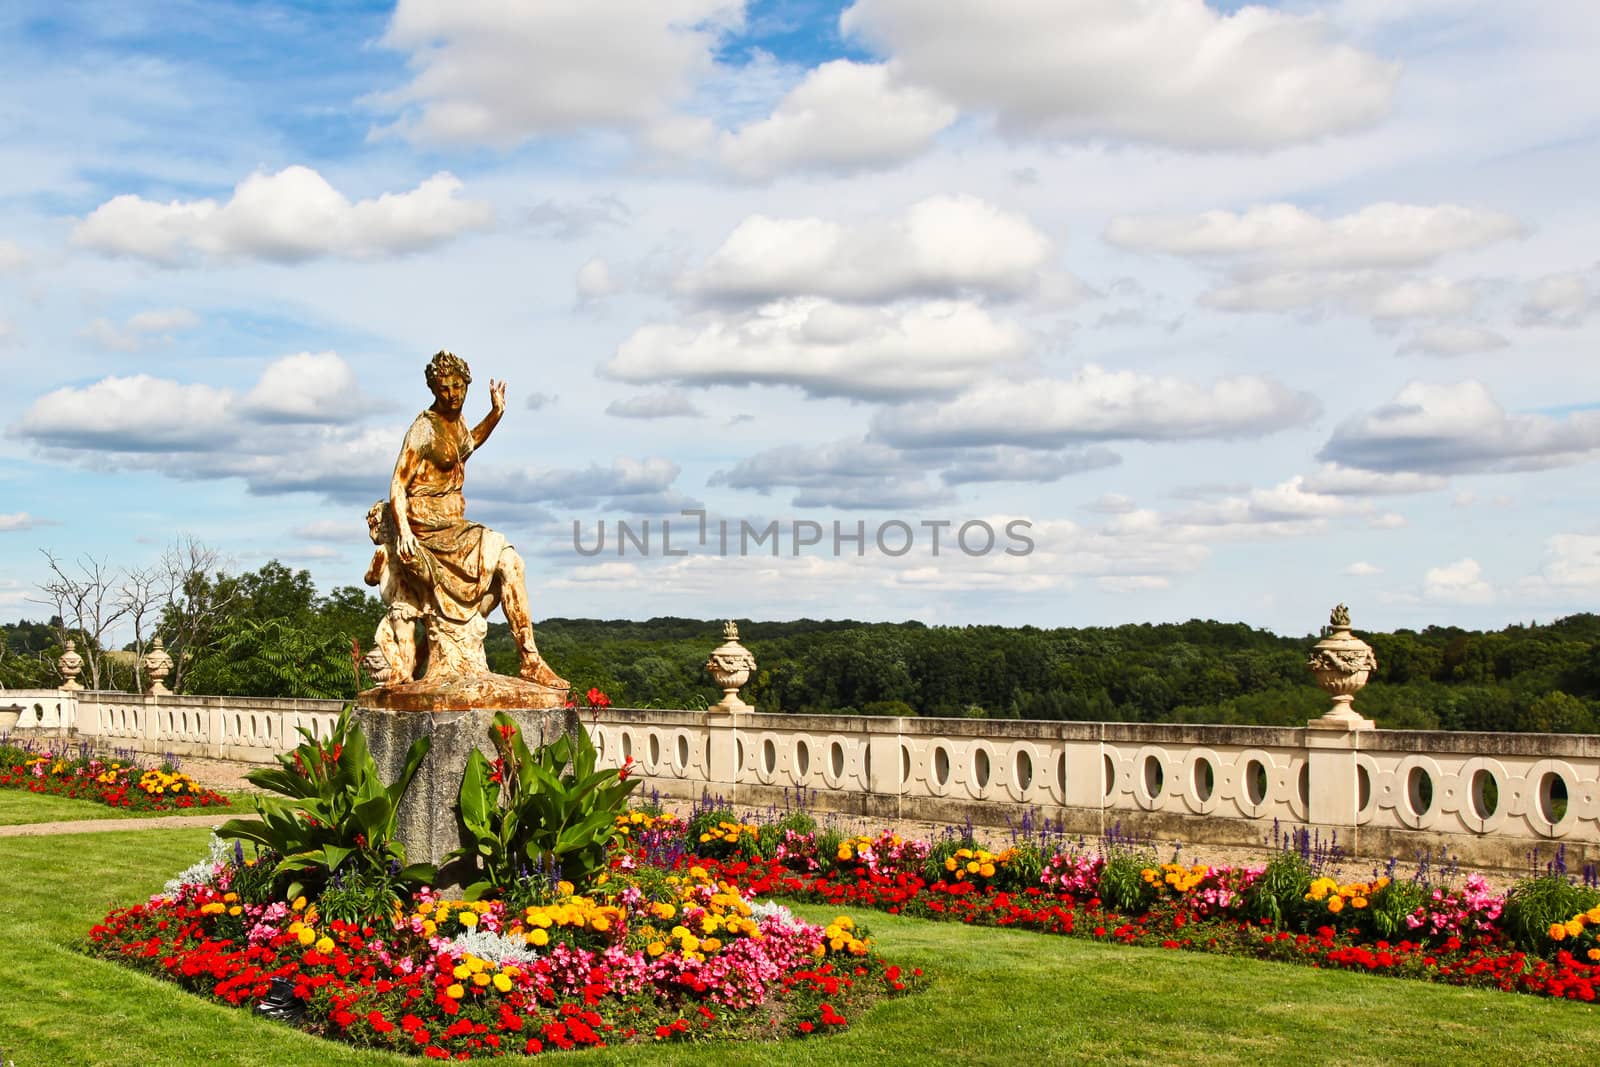 A statue at the garden of Chateau de Valencay, Loire Valley, France